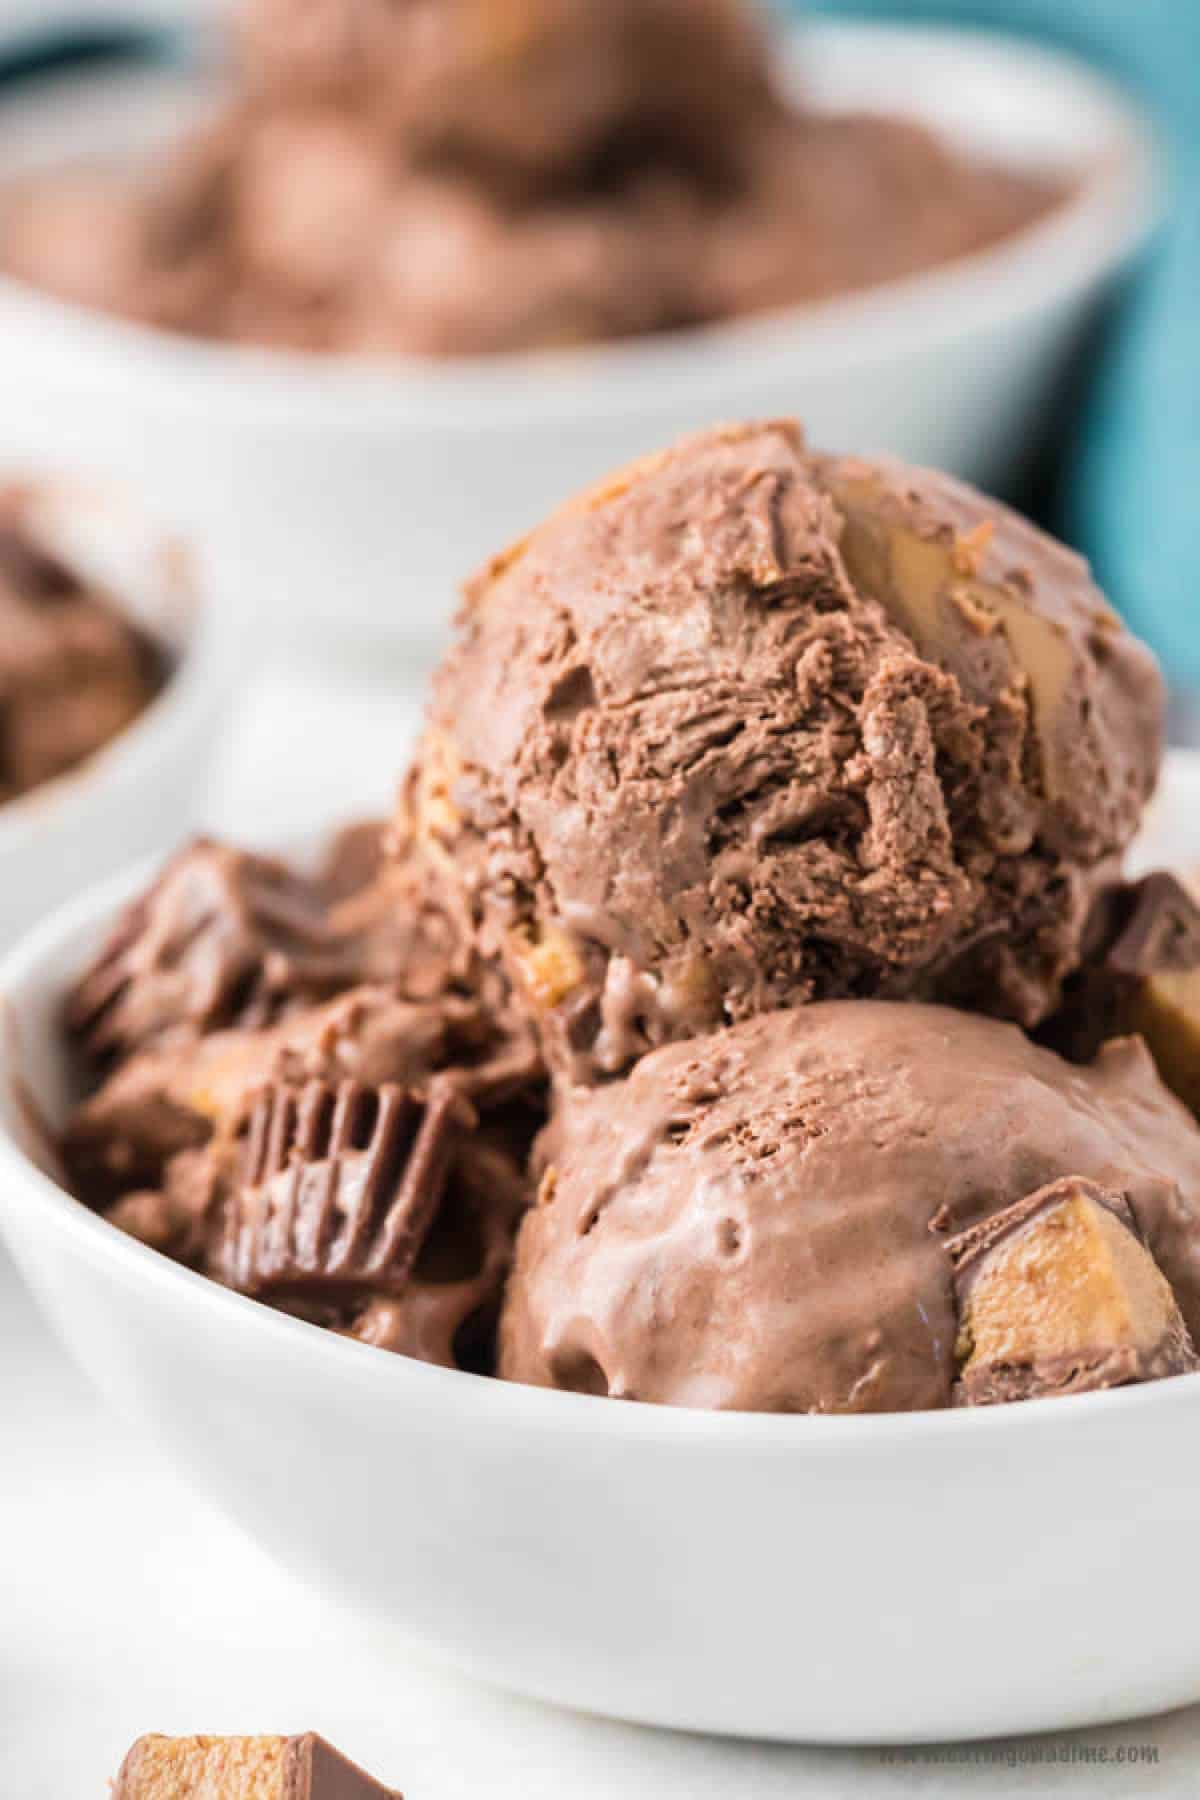 Chocolate peanut butter cup ice cream scoops in a bowl